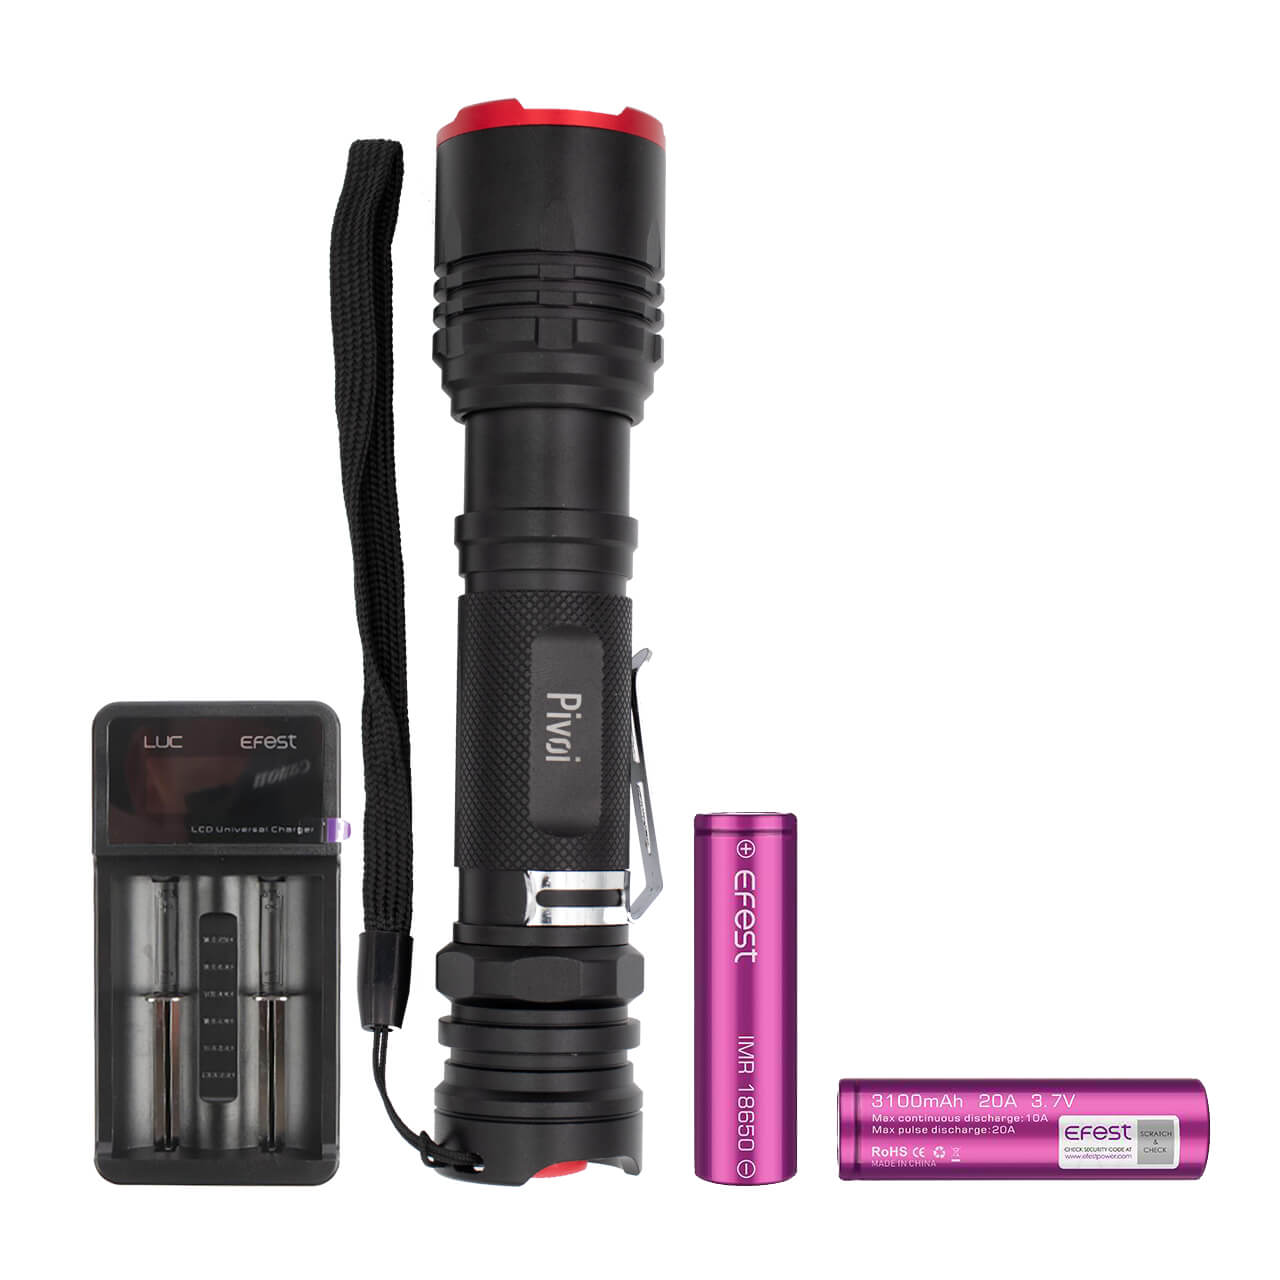 15W IP44 Water Resistant Flashlight with Efest LUC V2 Charger and 2 x 18650 Battery